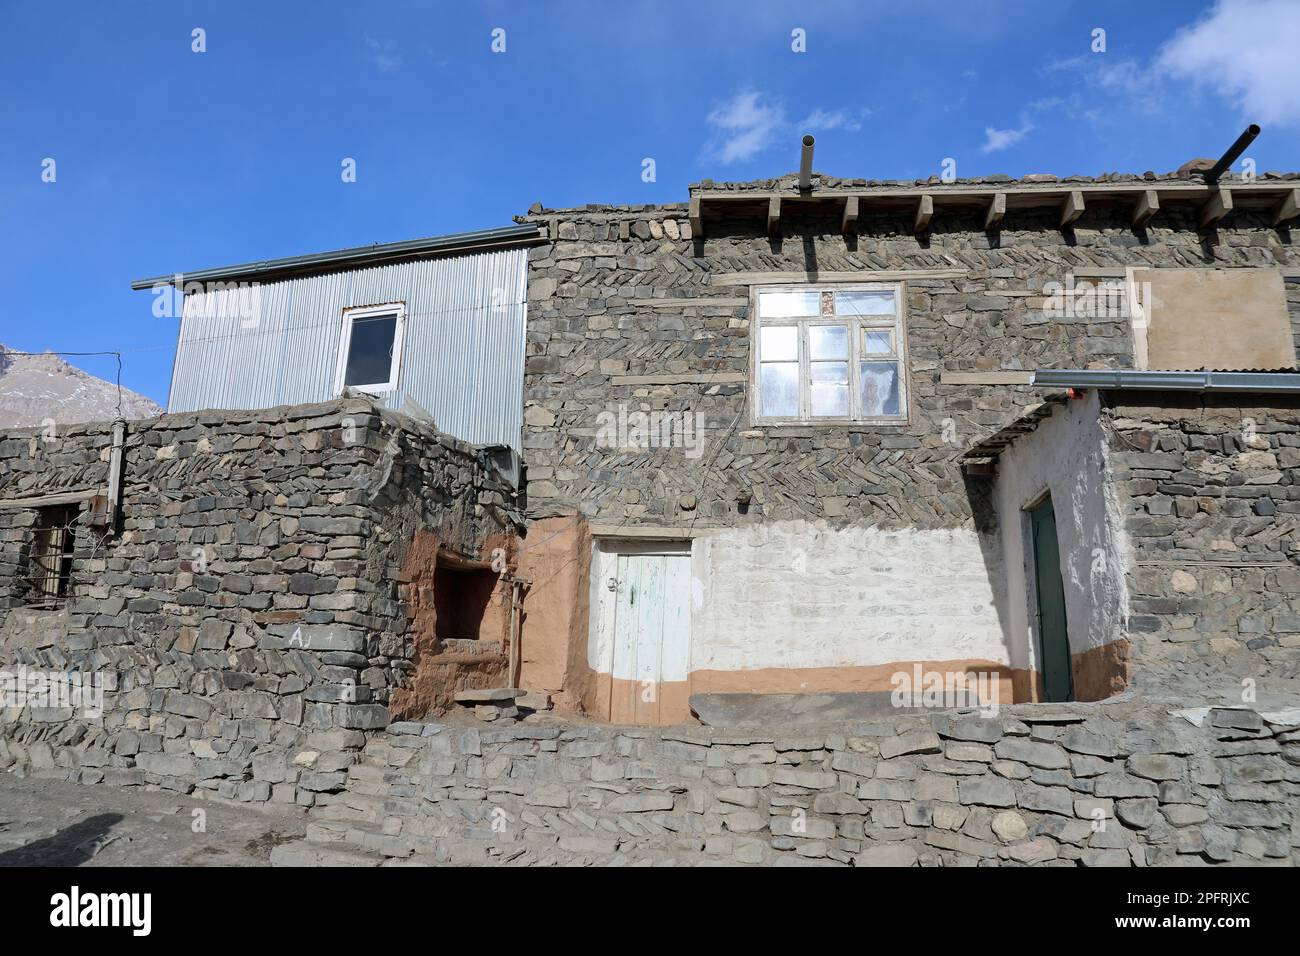 Traditional property at the remote Caucasian village of Khinalug in Azerbaijan Stock Photo